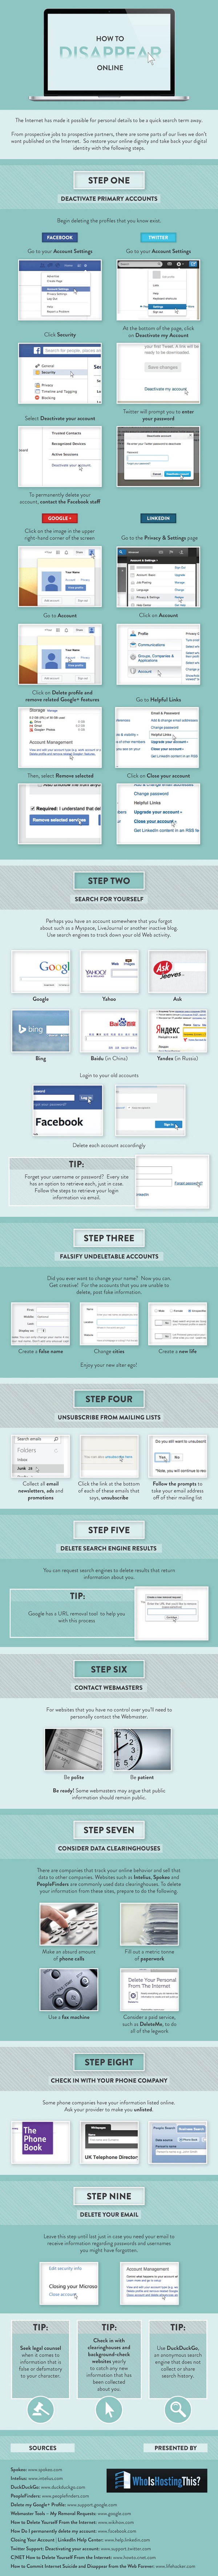 how-to-disappear-online-infographic